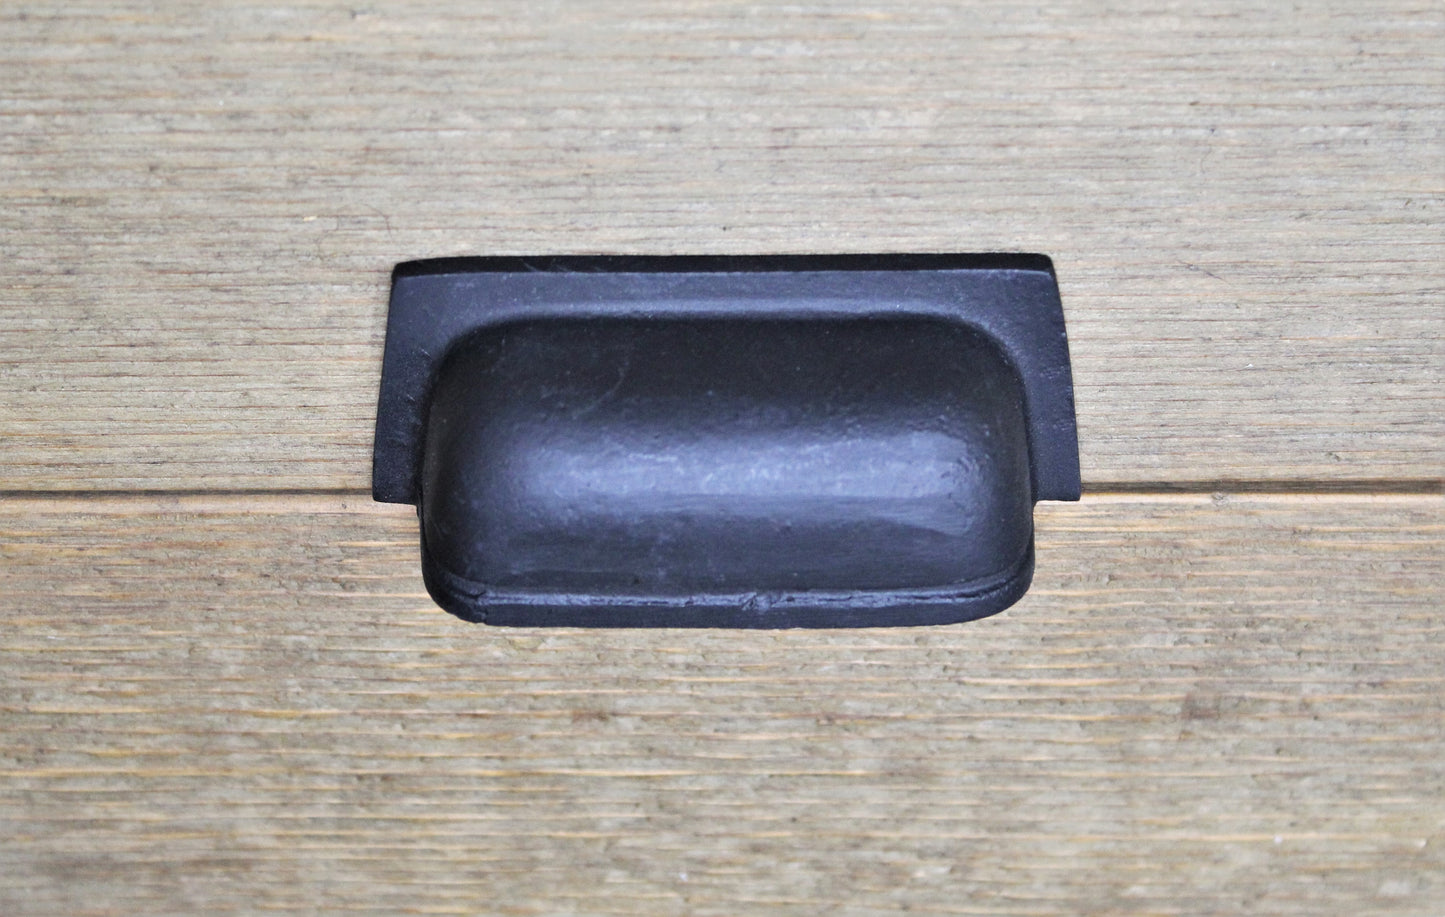 Stagecoach Iron Drawer Pull